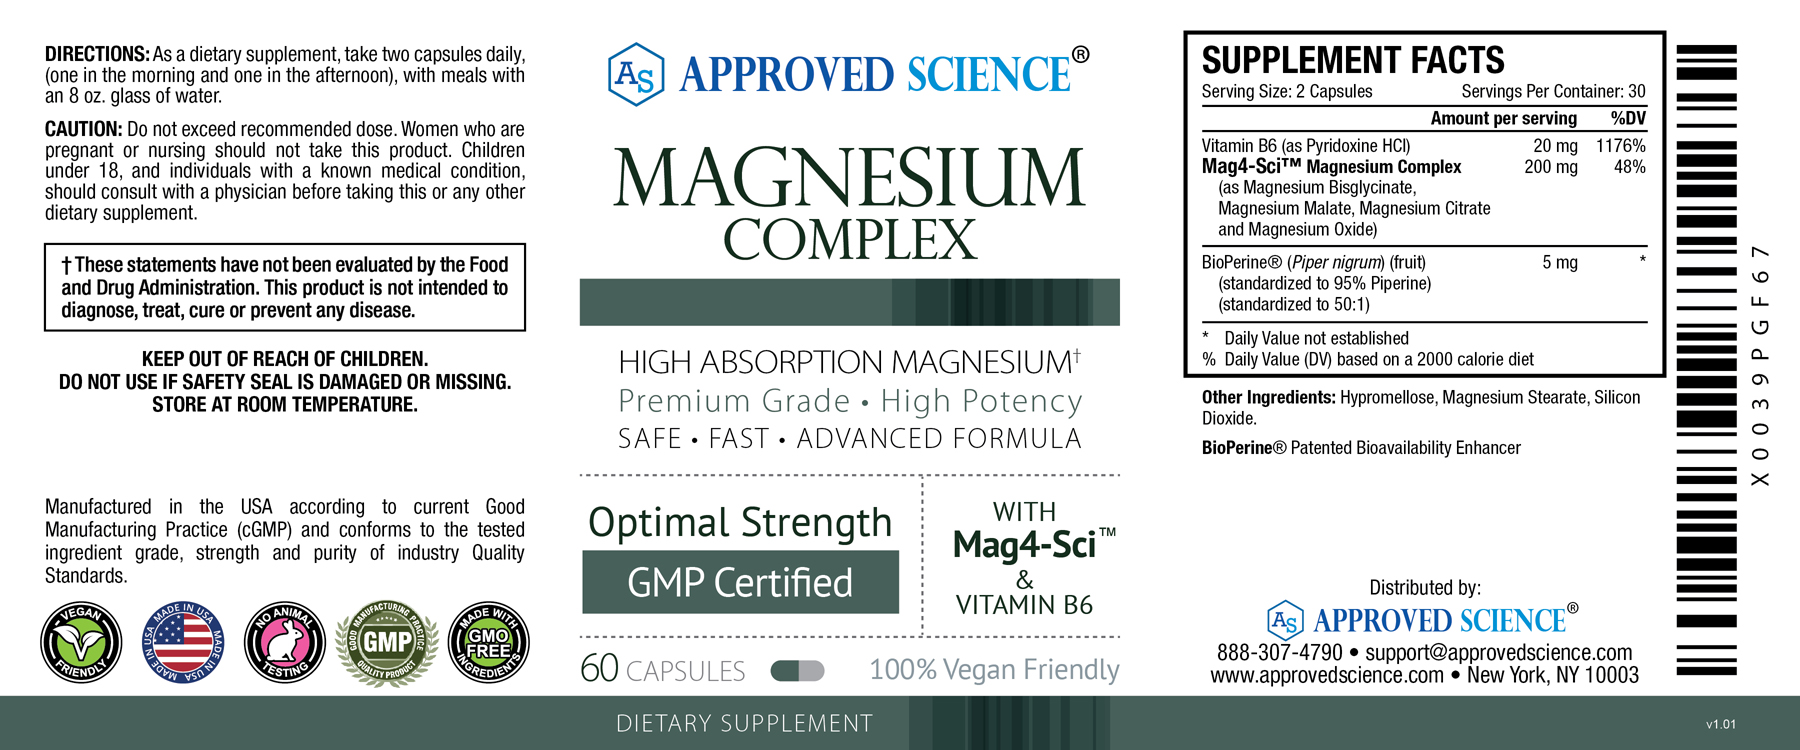 Approved Science® Magnesium Complex Supplement Facts